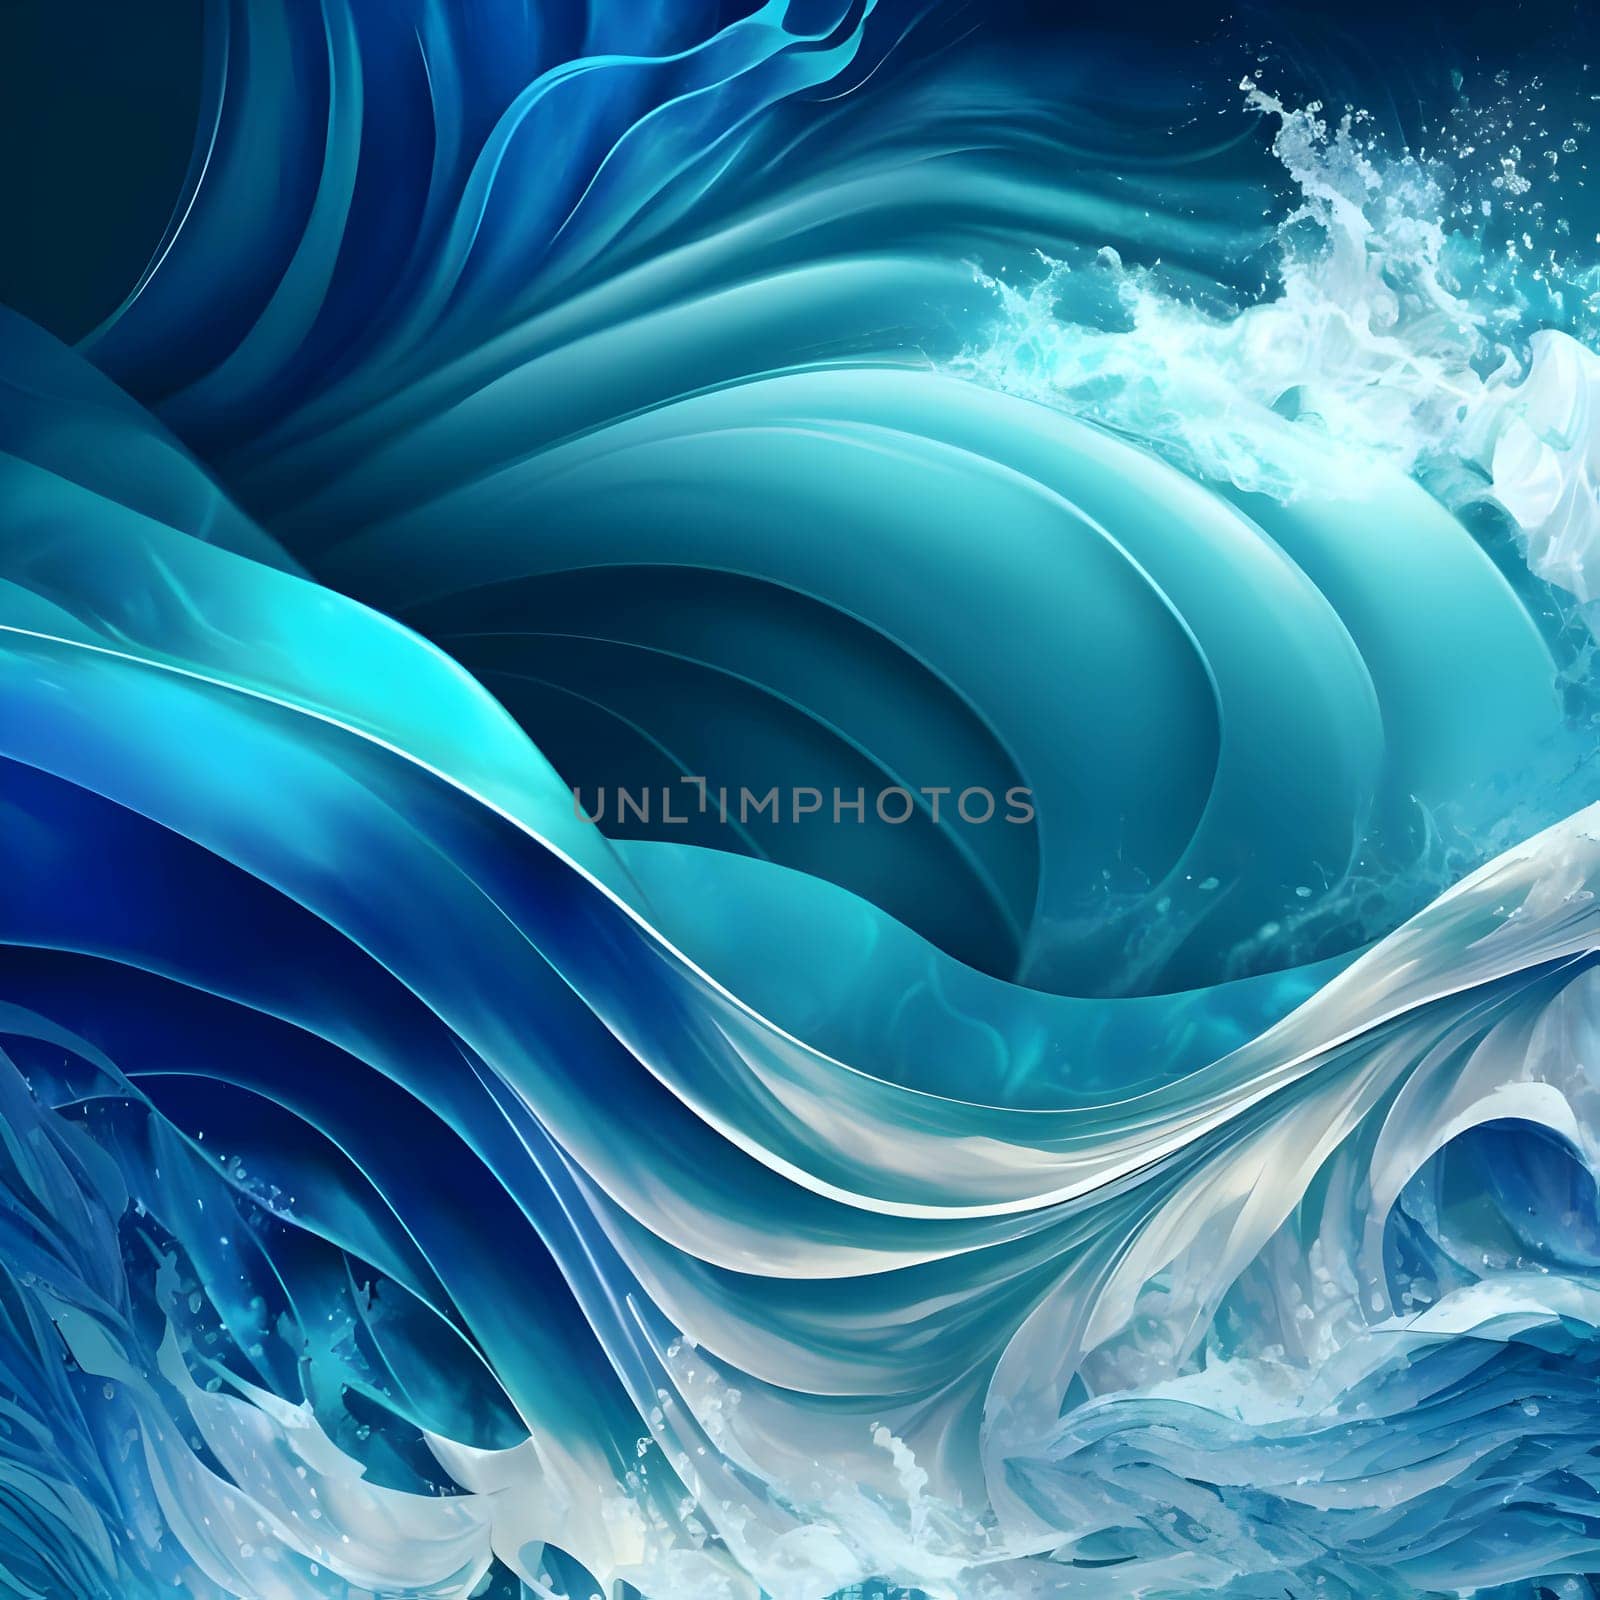 Wavy blue lines form a captivating abstract background wallpaper, creating a sense of movement and visual interest.